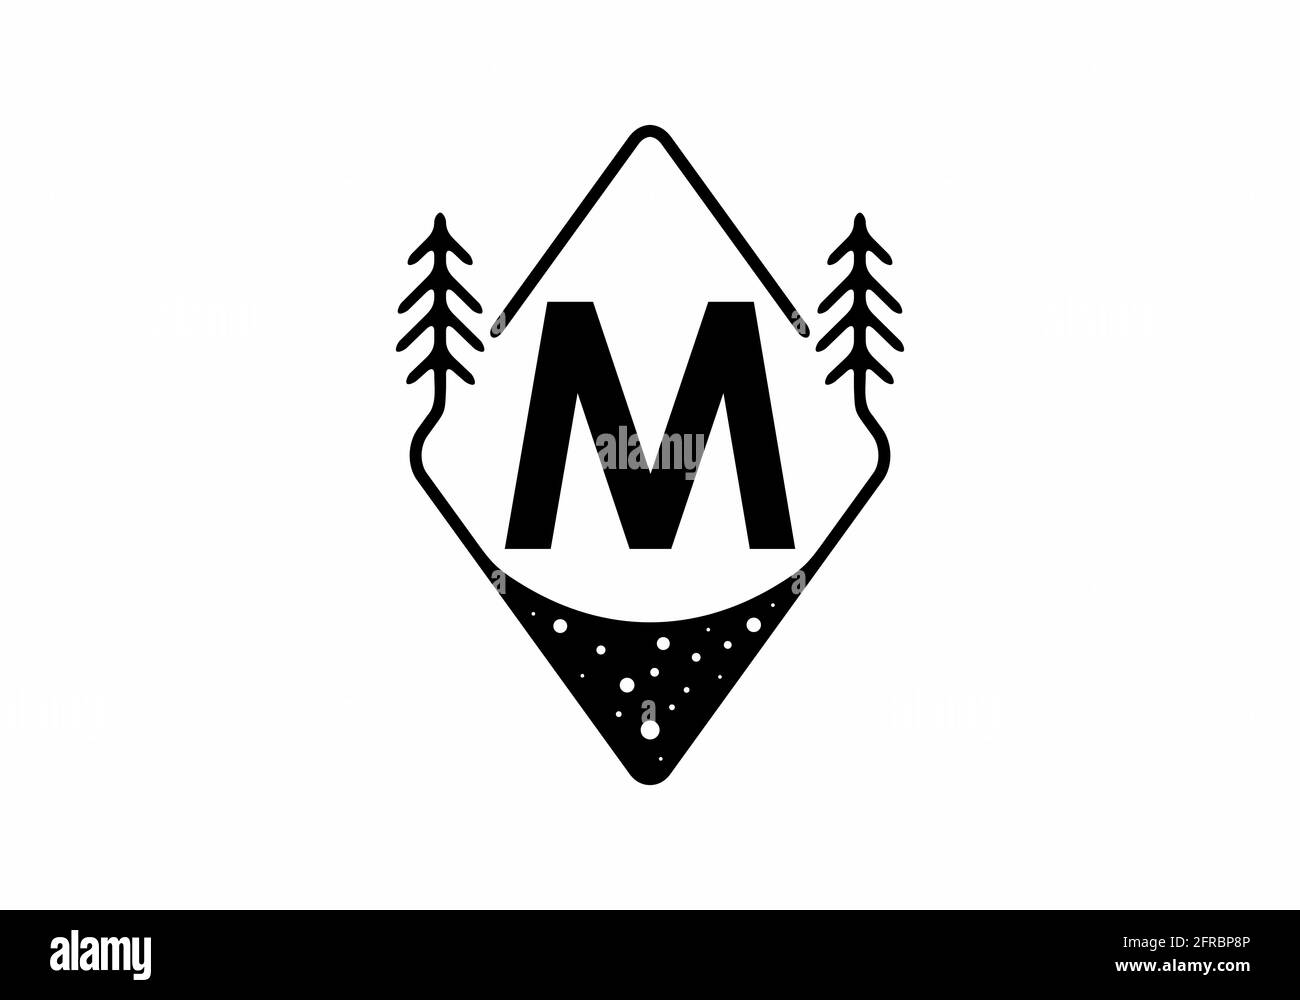 Black line art badge with pine trees and M letter design Stock Vector